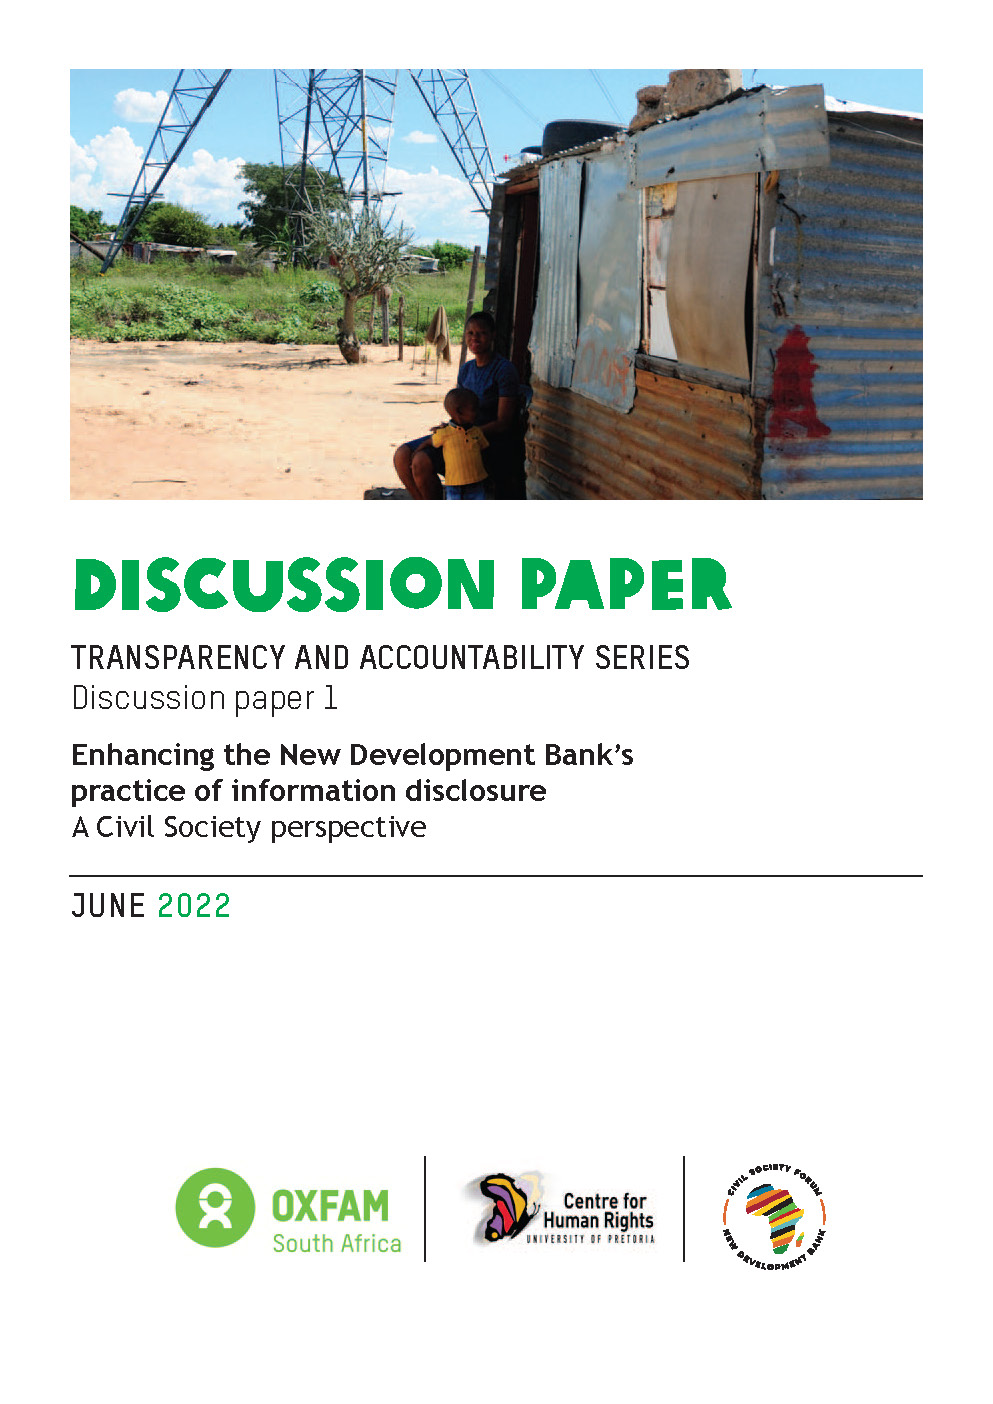 Transparency and Accountability Series Discussion Paper 1